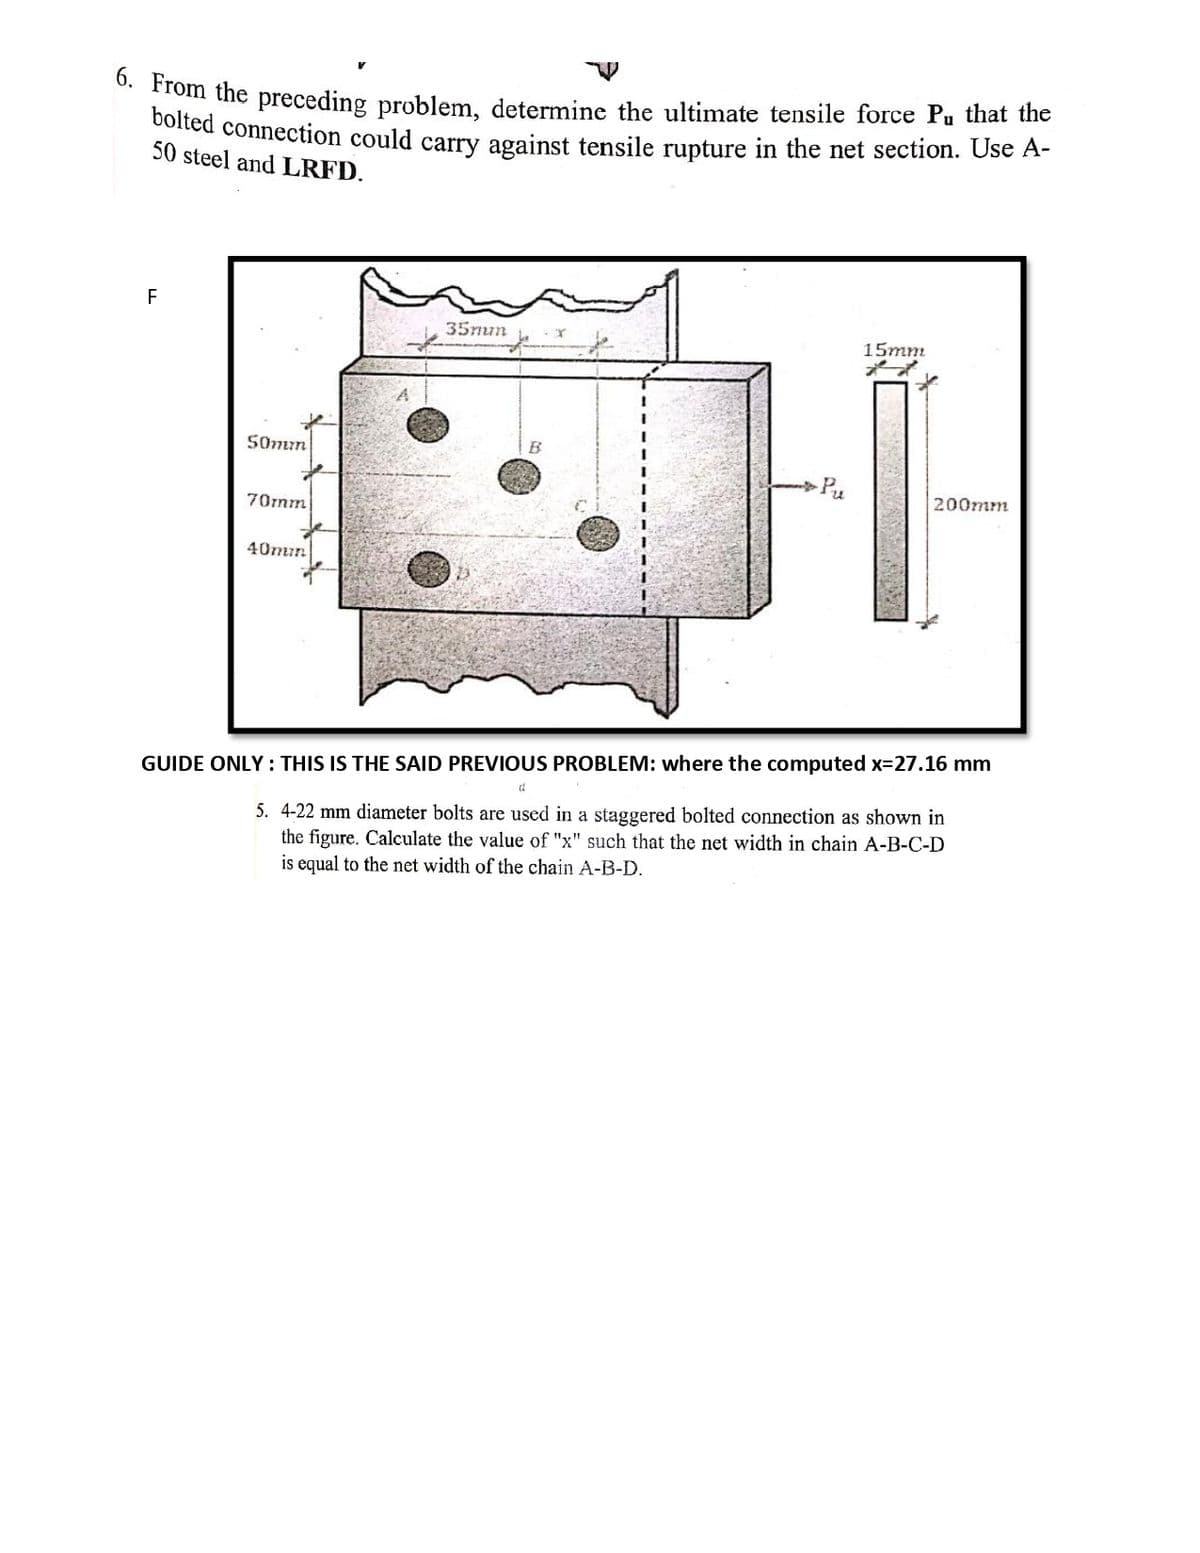 n the preceding problem, determine the ultimate tensile force Pu that the
colted connection could carry against tensile rupture in the net section. Use A-
50 steel and LRFD.
F
35mun
15mm
50mm
B
Pu
200mm
70rnm
40mir.
GUIDE ONLY : THIS IS THE SAID PREVIOUS PROBLEM: where the computed x=27.16 mm
5. 4-22 mm diameter bolts are used in a staggered bolted connection as shown in
the figure. Calculate the value of "x" such that the net width in chain A-B-C-D
is equal to the net width of the chain A-B-D.
